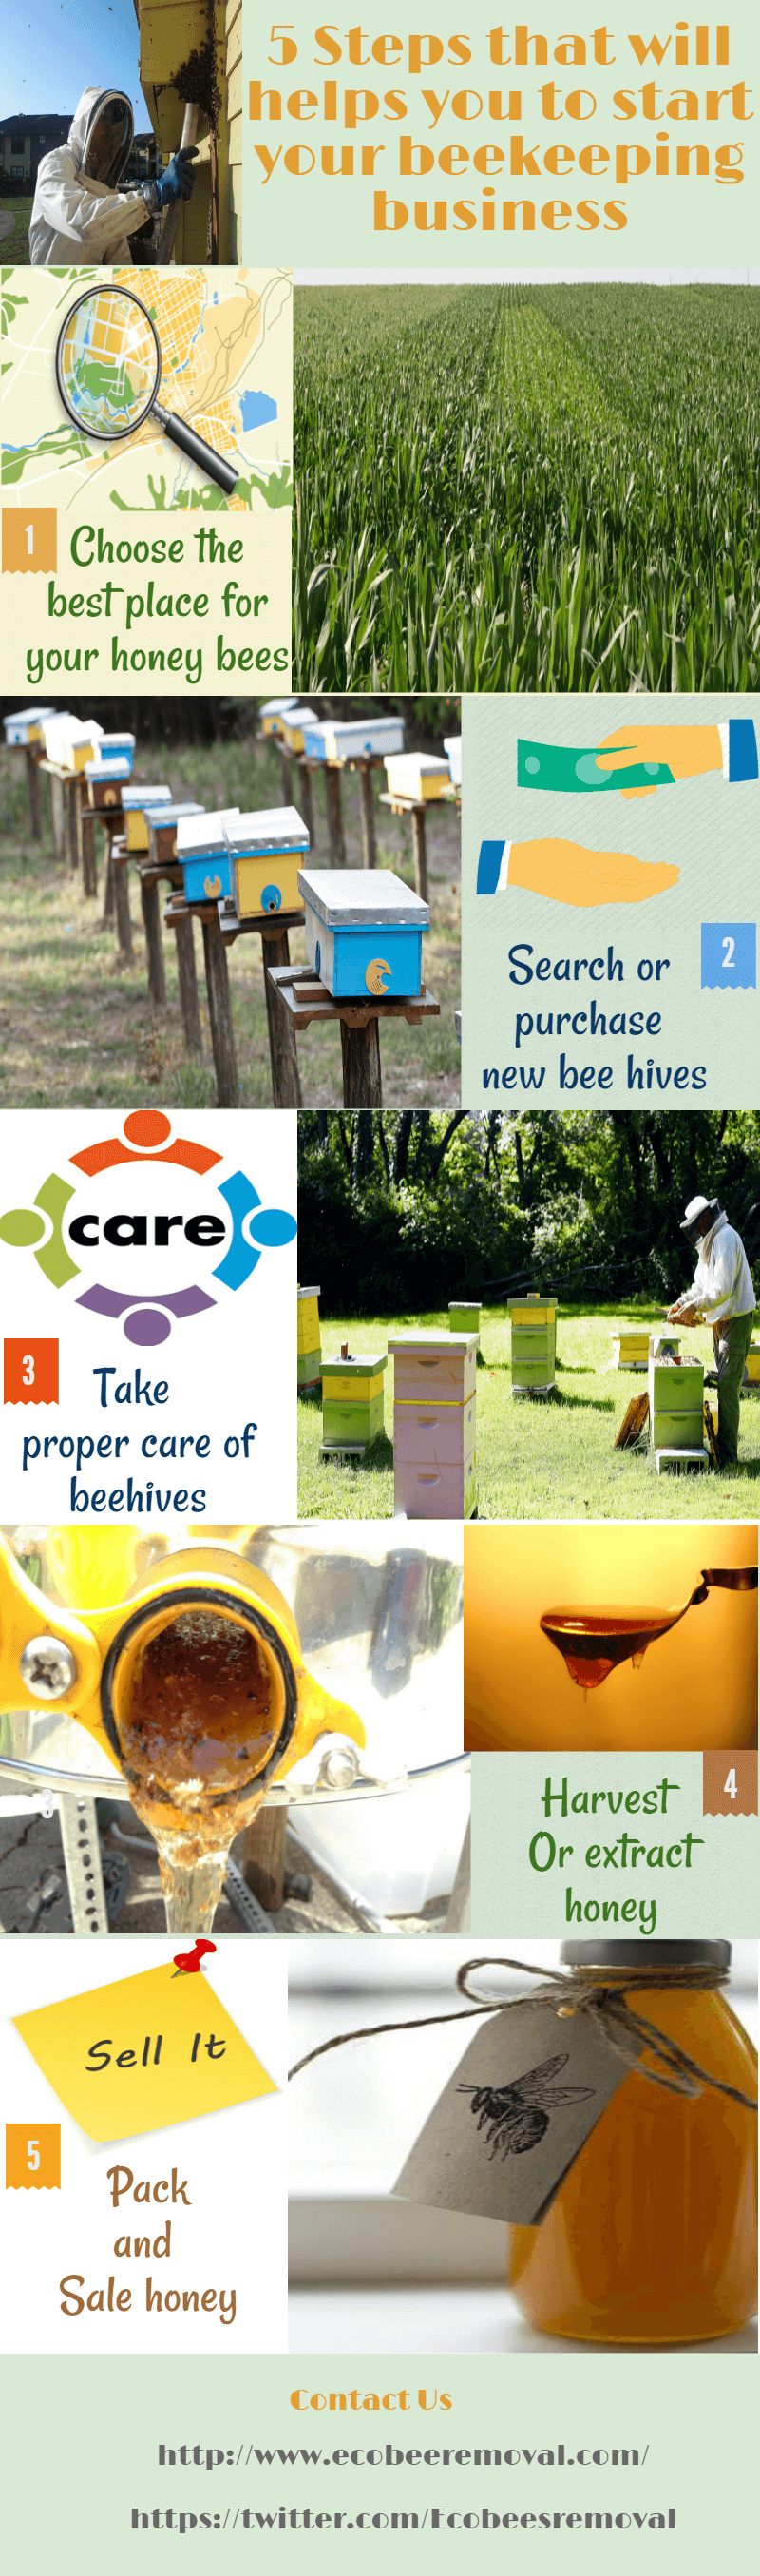 5 Steps that will helps you to start your beekeeping business